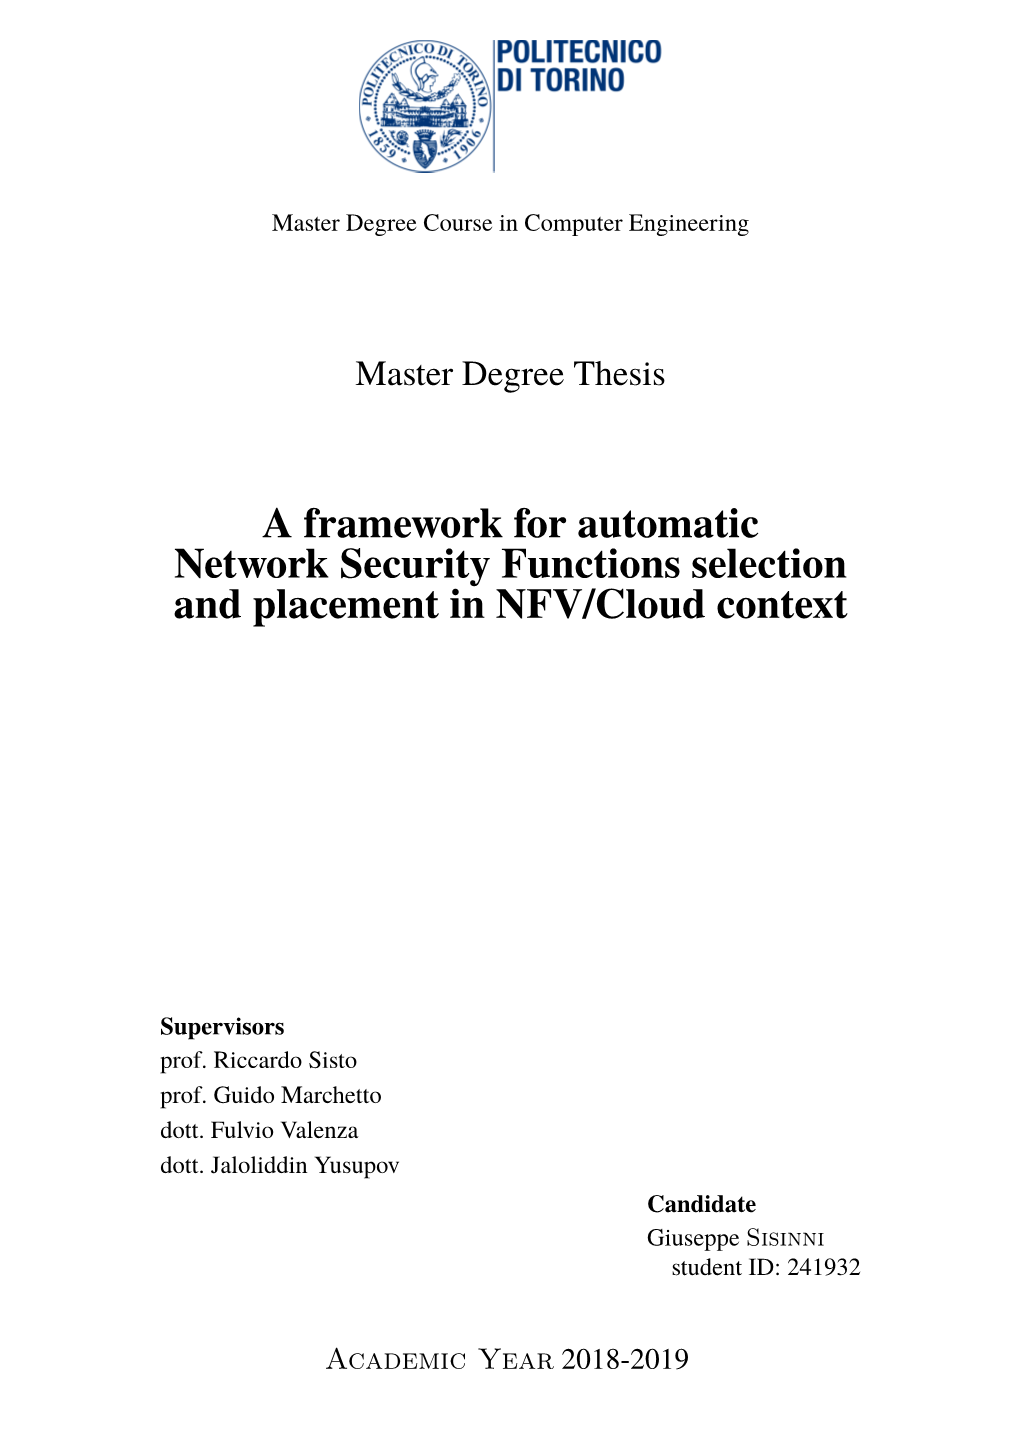 A Framework for Automatic Network Security Functions Selection and Placement in NFV/Cloud Context